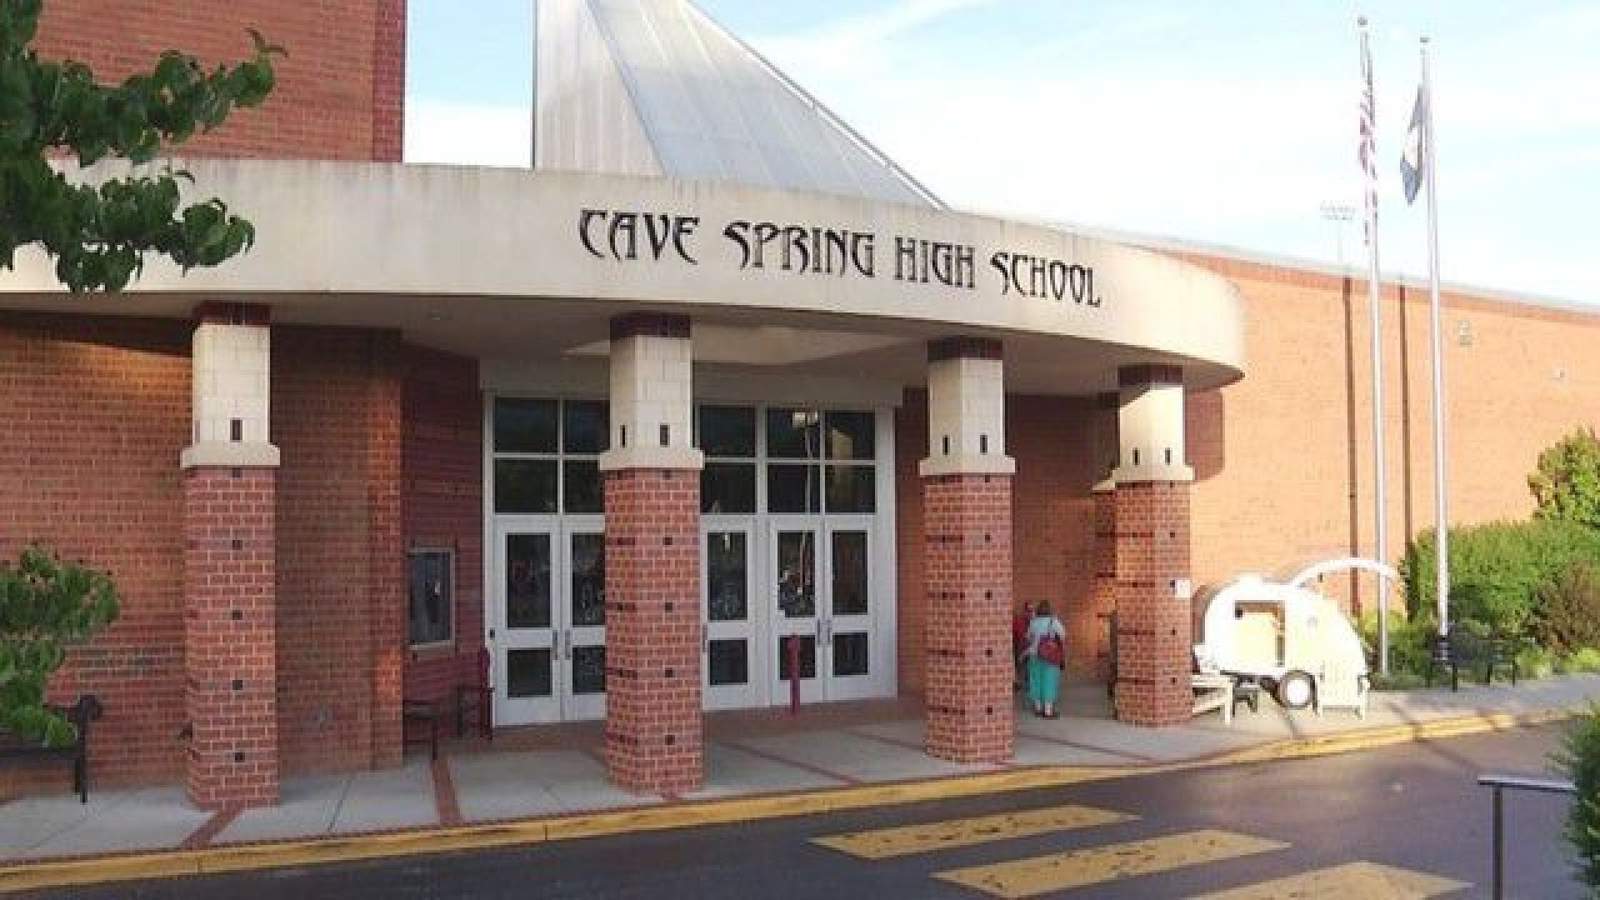 One student tests positive for coronavirus at Cave Spring High School